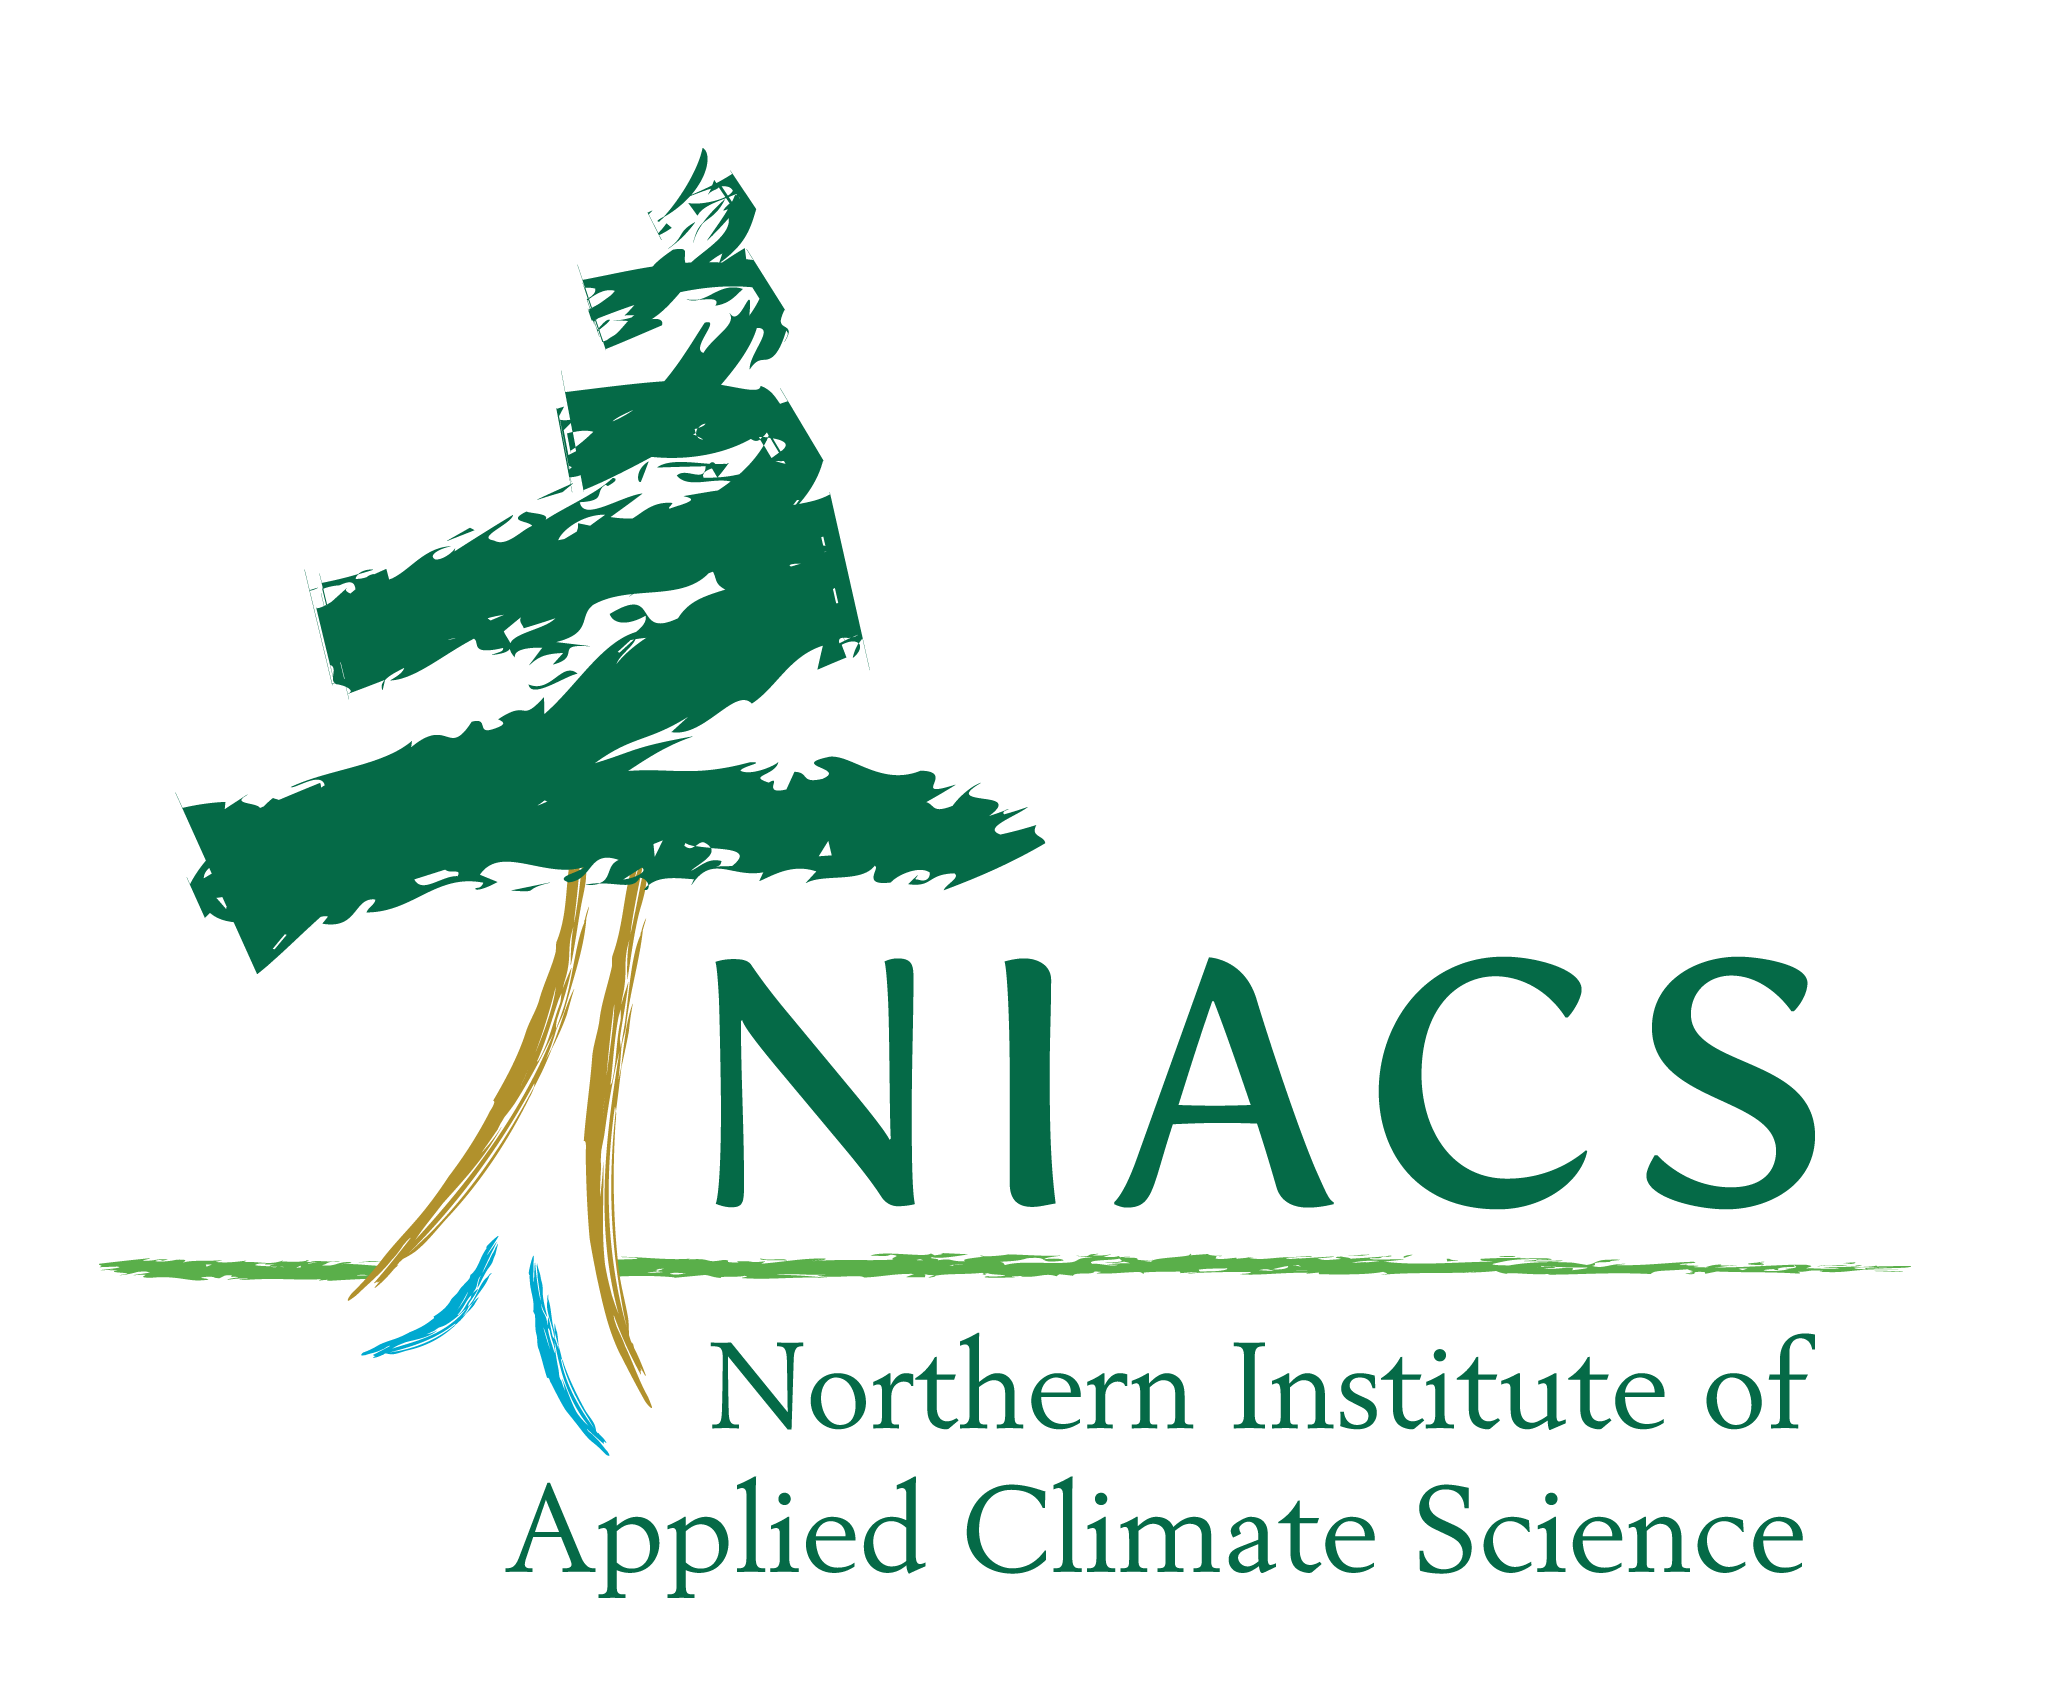 Northern Institute of Applied Climate Science Seeks Climate Change Specialist